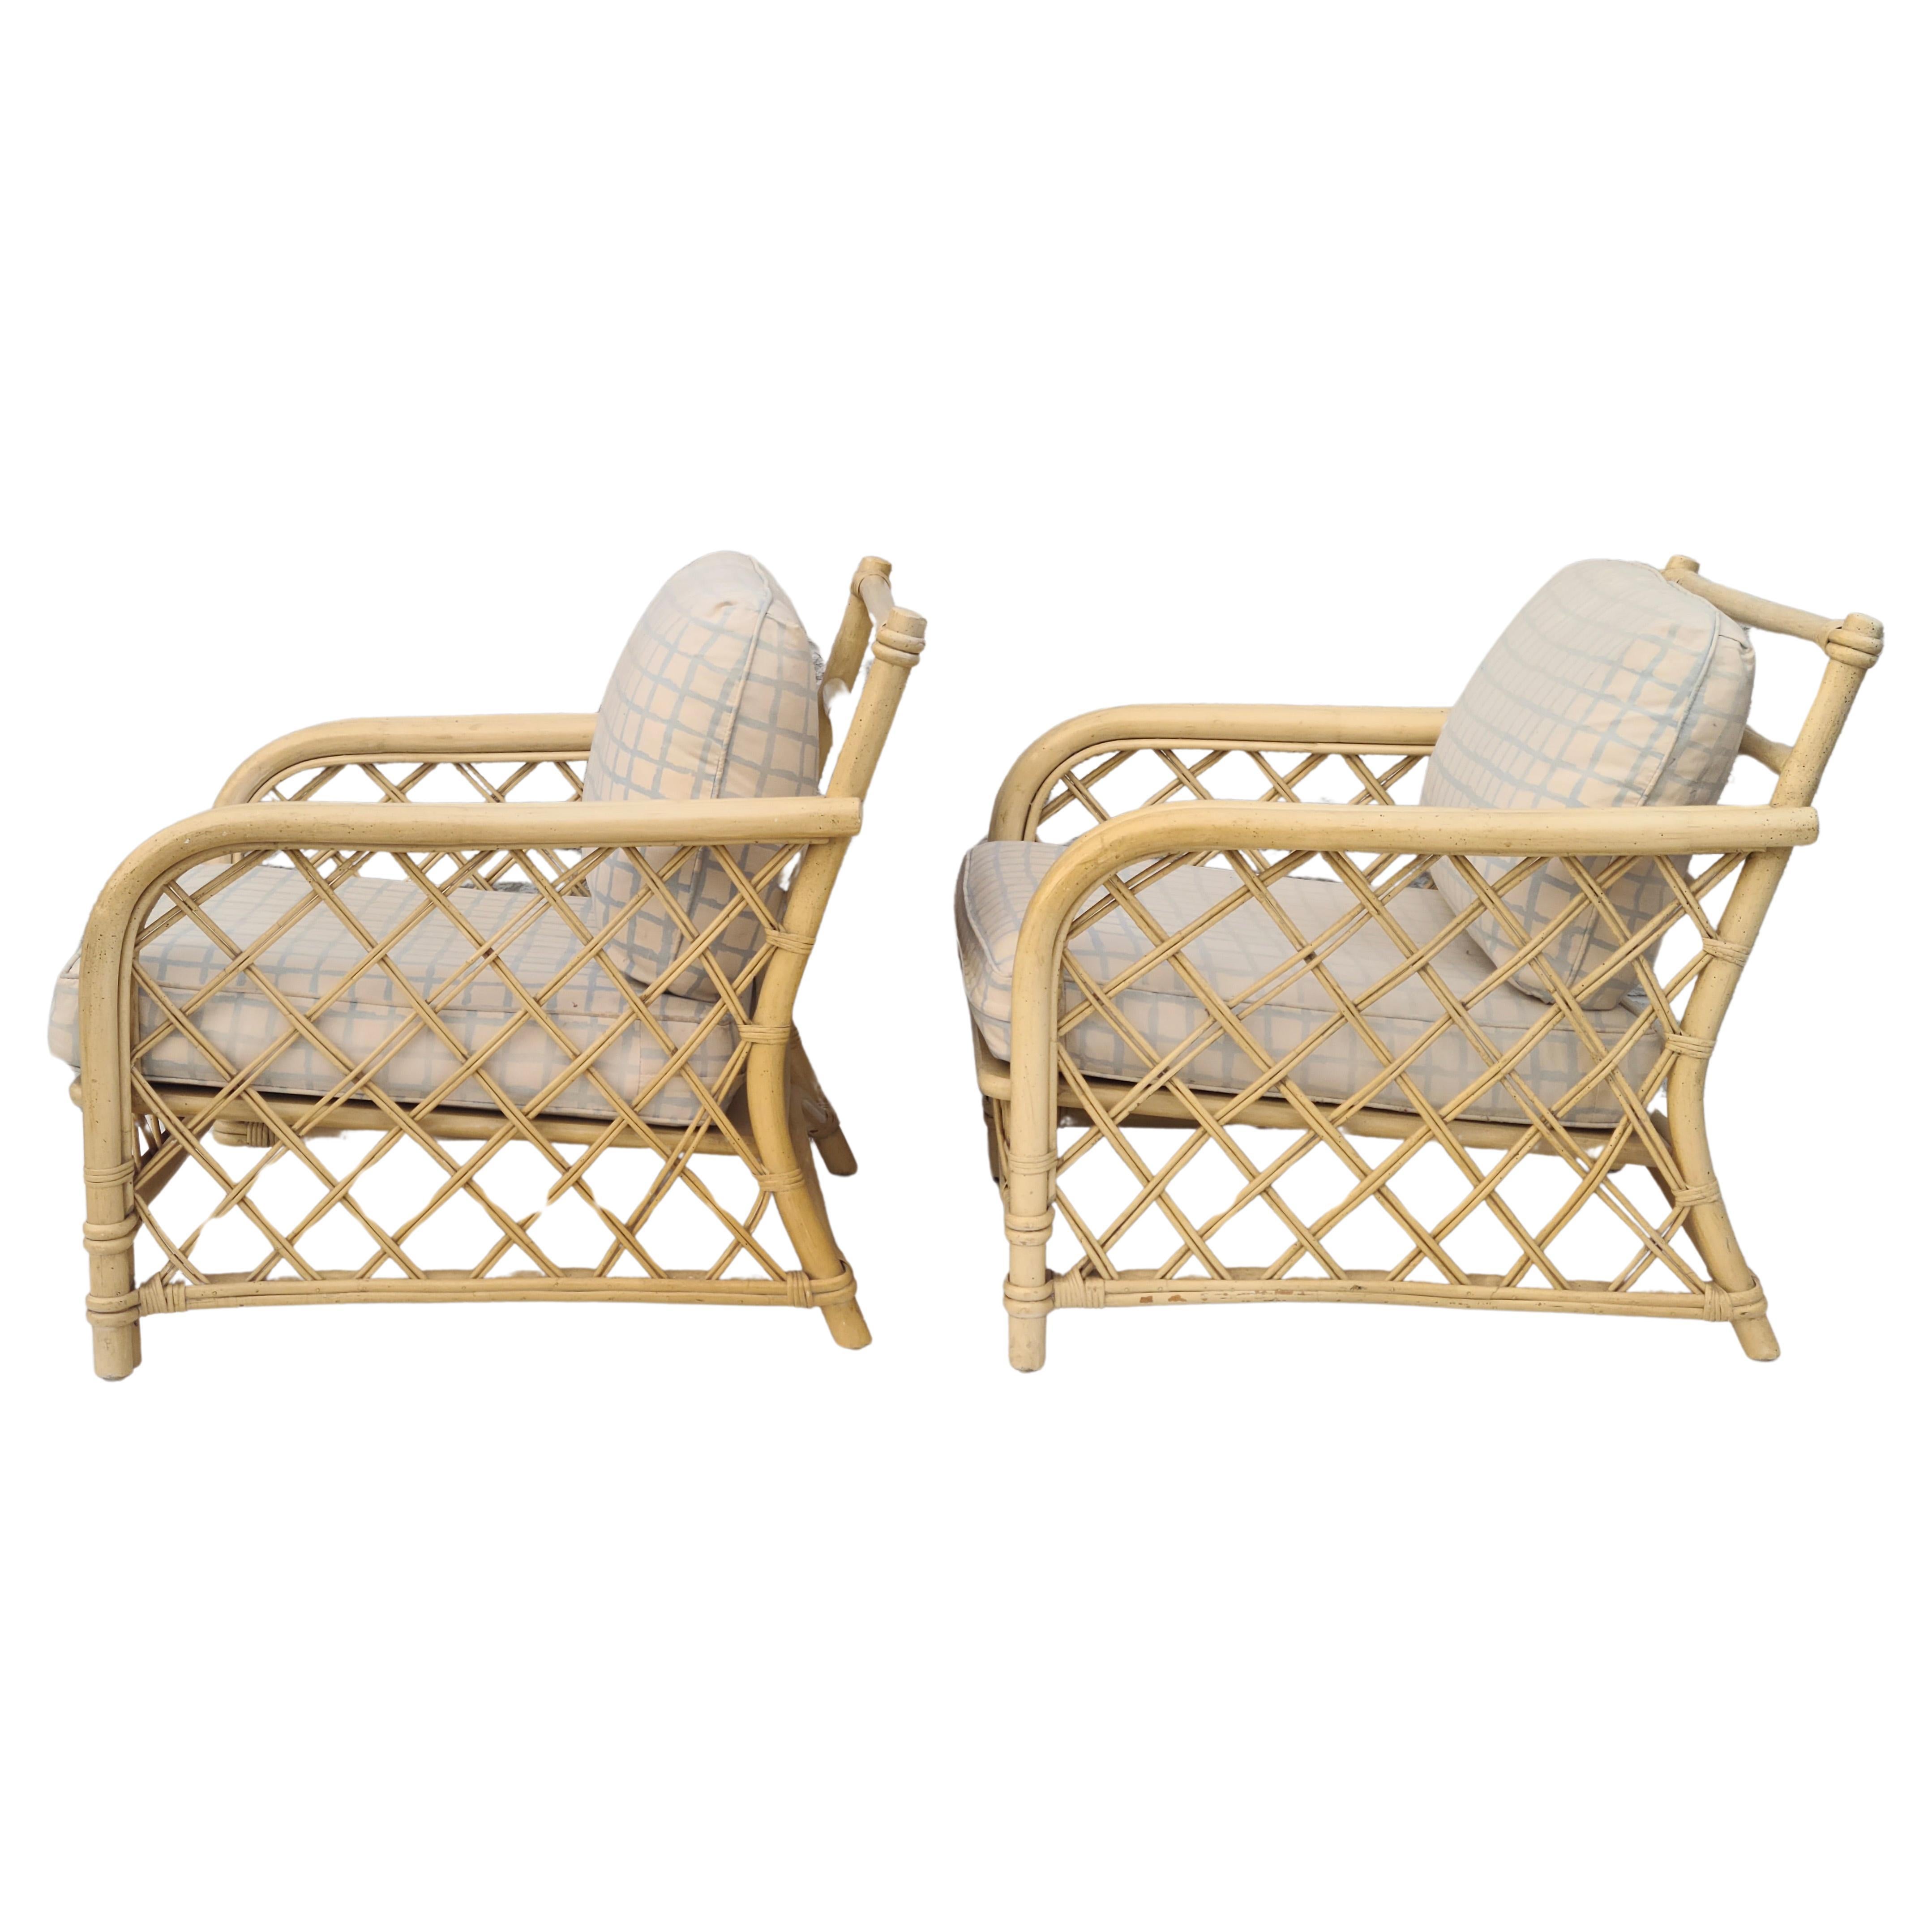 Please feel free to reach out for accurate shipping to your location,.

Pair low lounge chairs by Ficks Reed.
As found condition. New Straps included. 
Frames are solid.
Upholstered cushions for dimensional scale only.
Please feel free to reach out